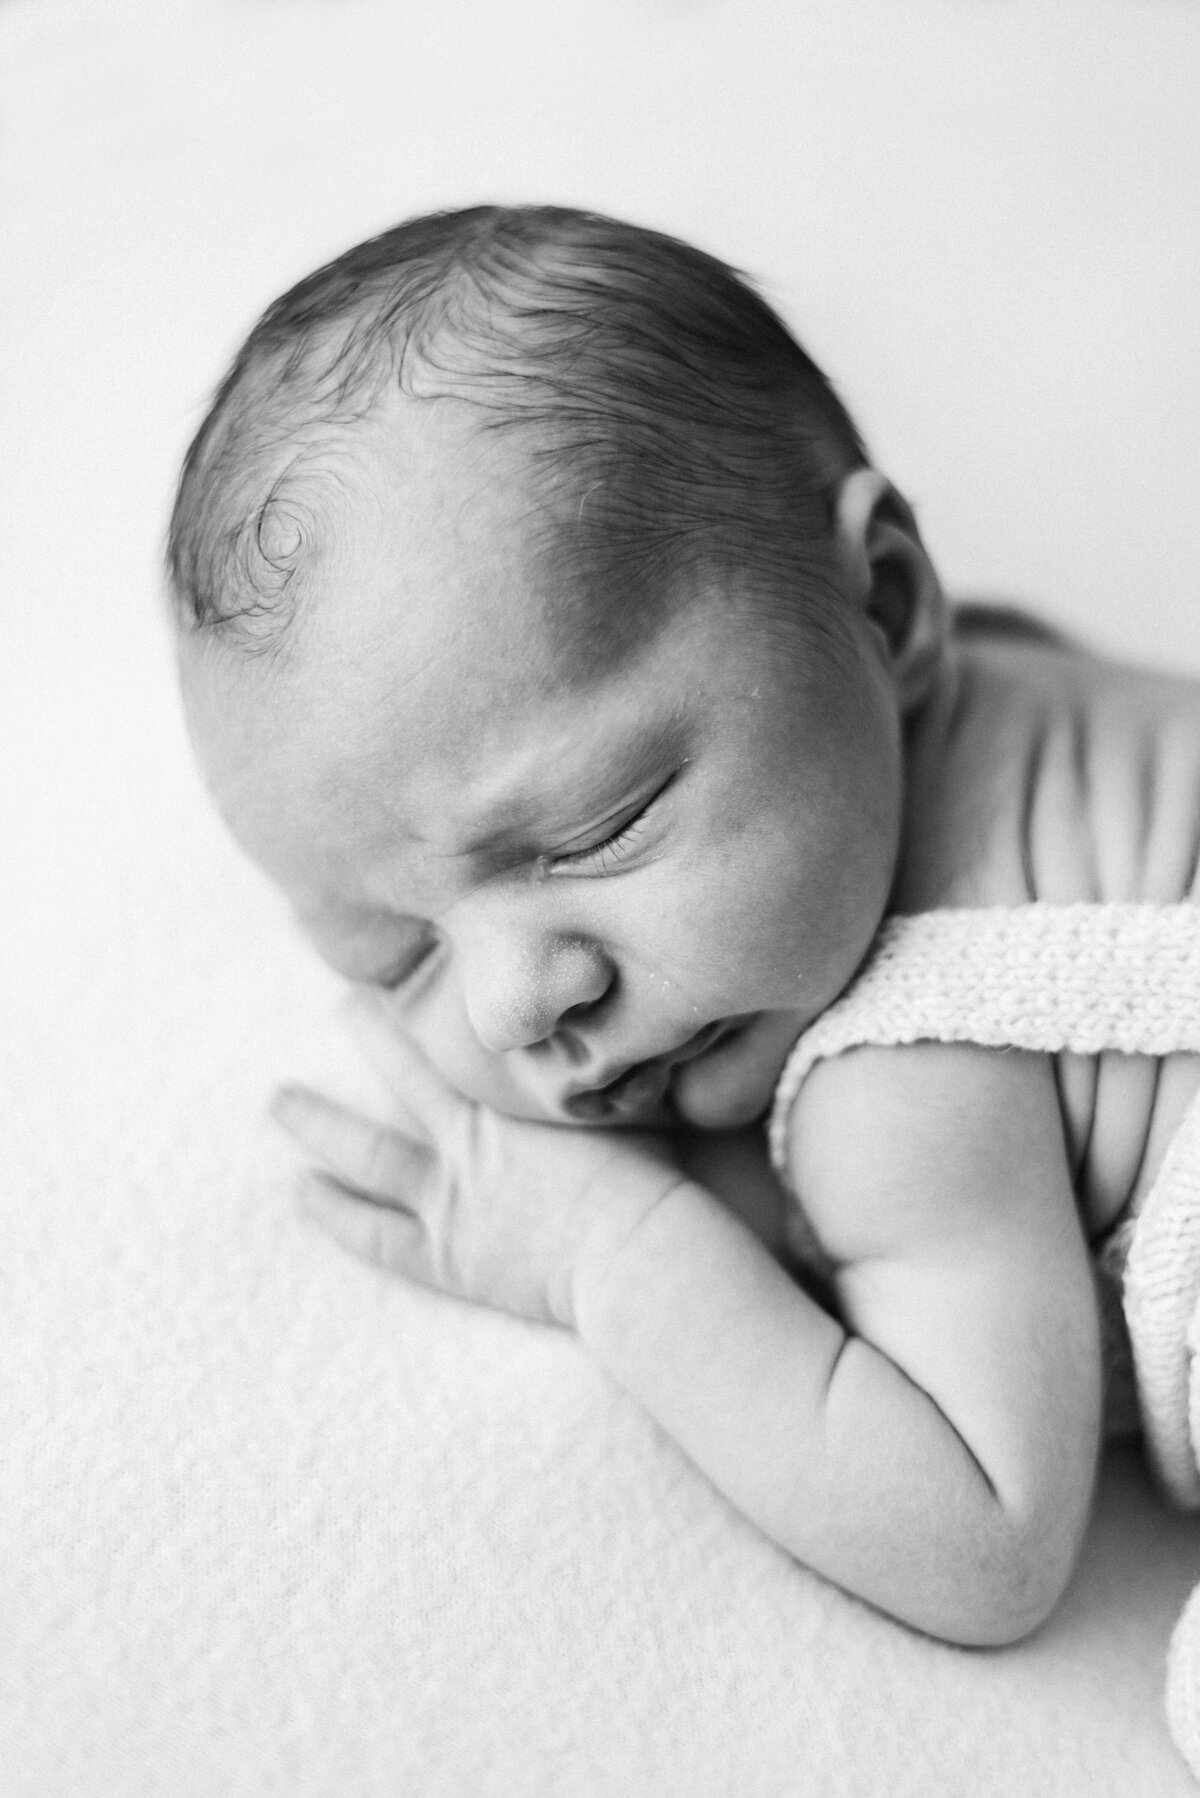 Baby boy asleep on blanket during a photoshoot in Billingshurst